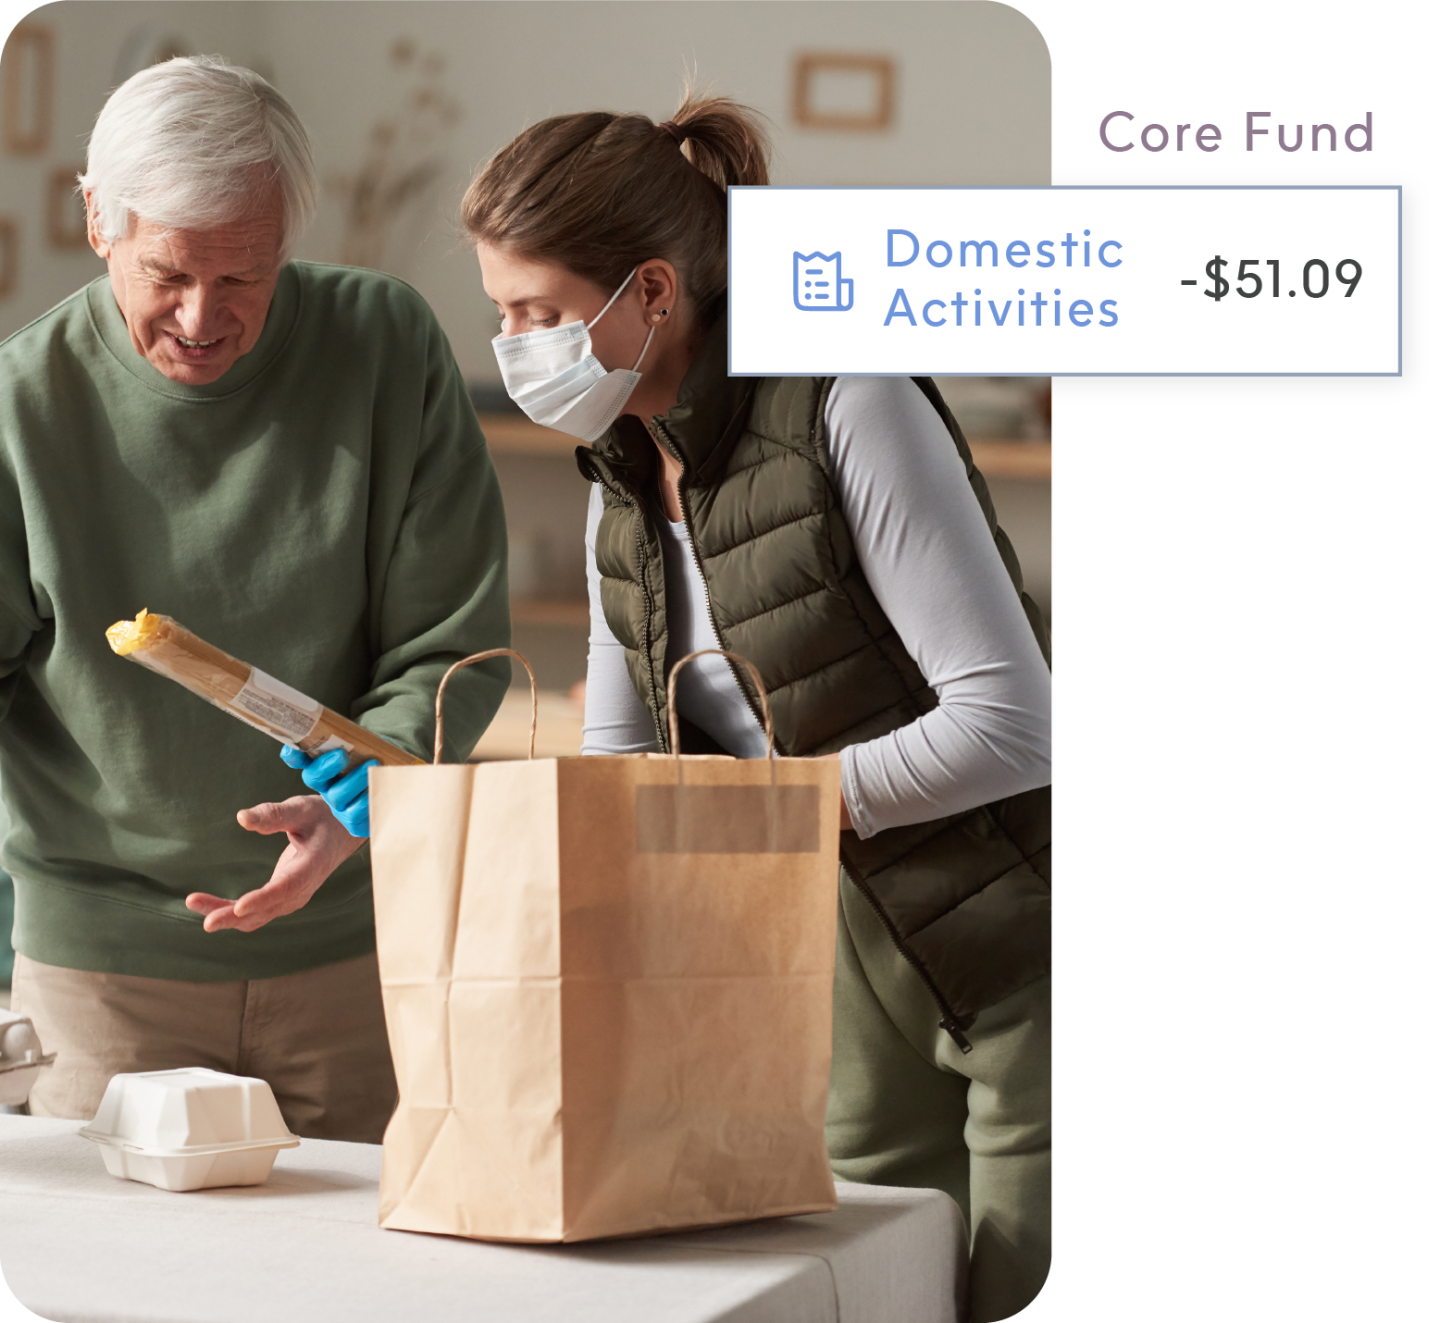 Aged care support worker helping elderly man unpack groceries with funds on ShiftCare showing a deduction from domestic activities